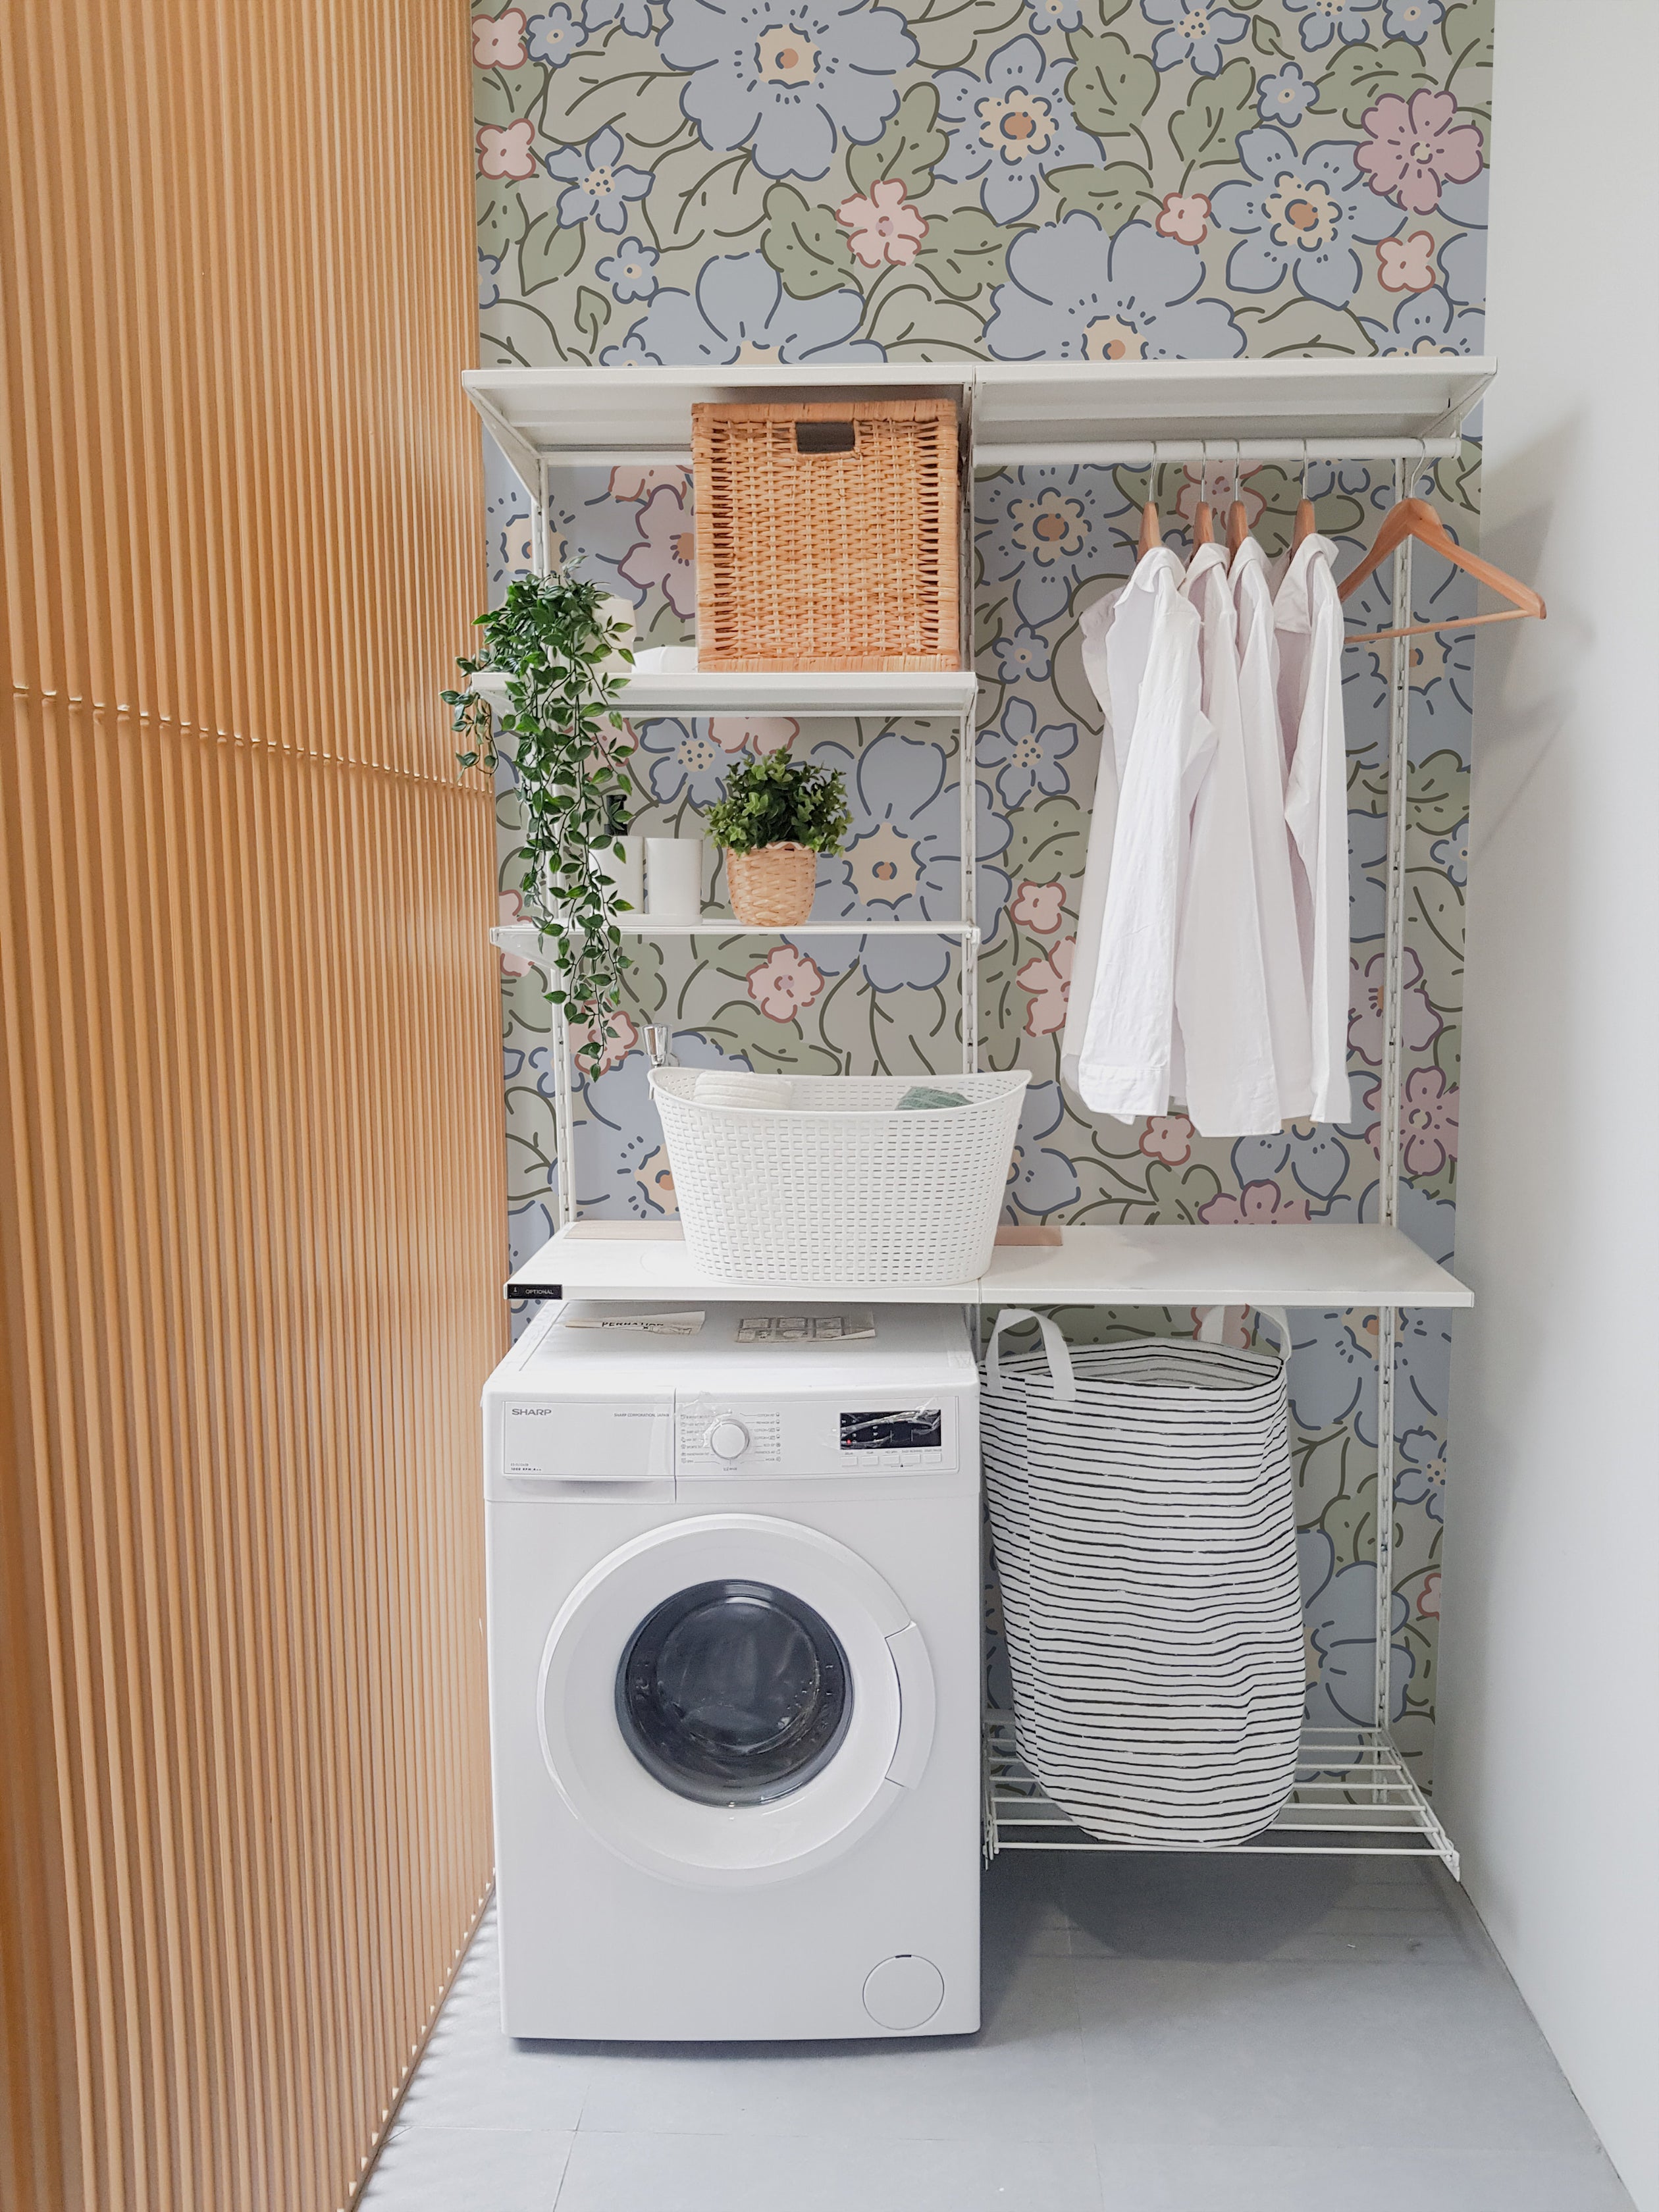 A modern laundry area featuring Joie Wallpaper with a vibrant floral pattern of blue, pink, and green flowers on a light green background. The space is efficiently organized with a white washing machine, built-in shelving holding various baskets and green plants, and white shirts hanging on wooden hangers, creating a refreshing and functional environment.